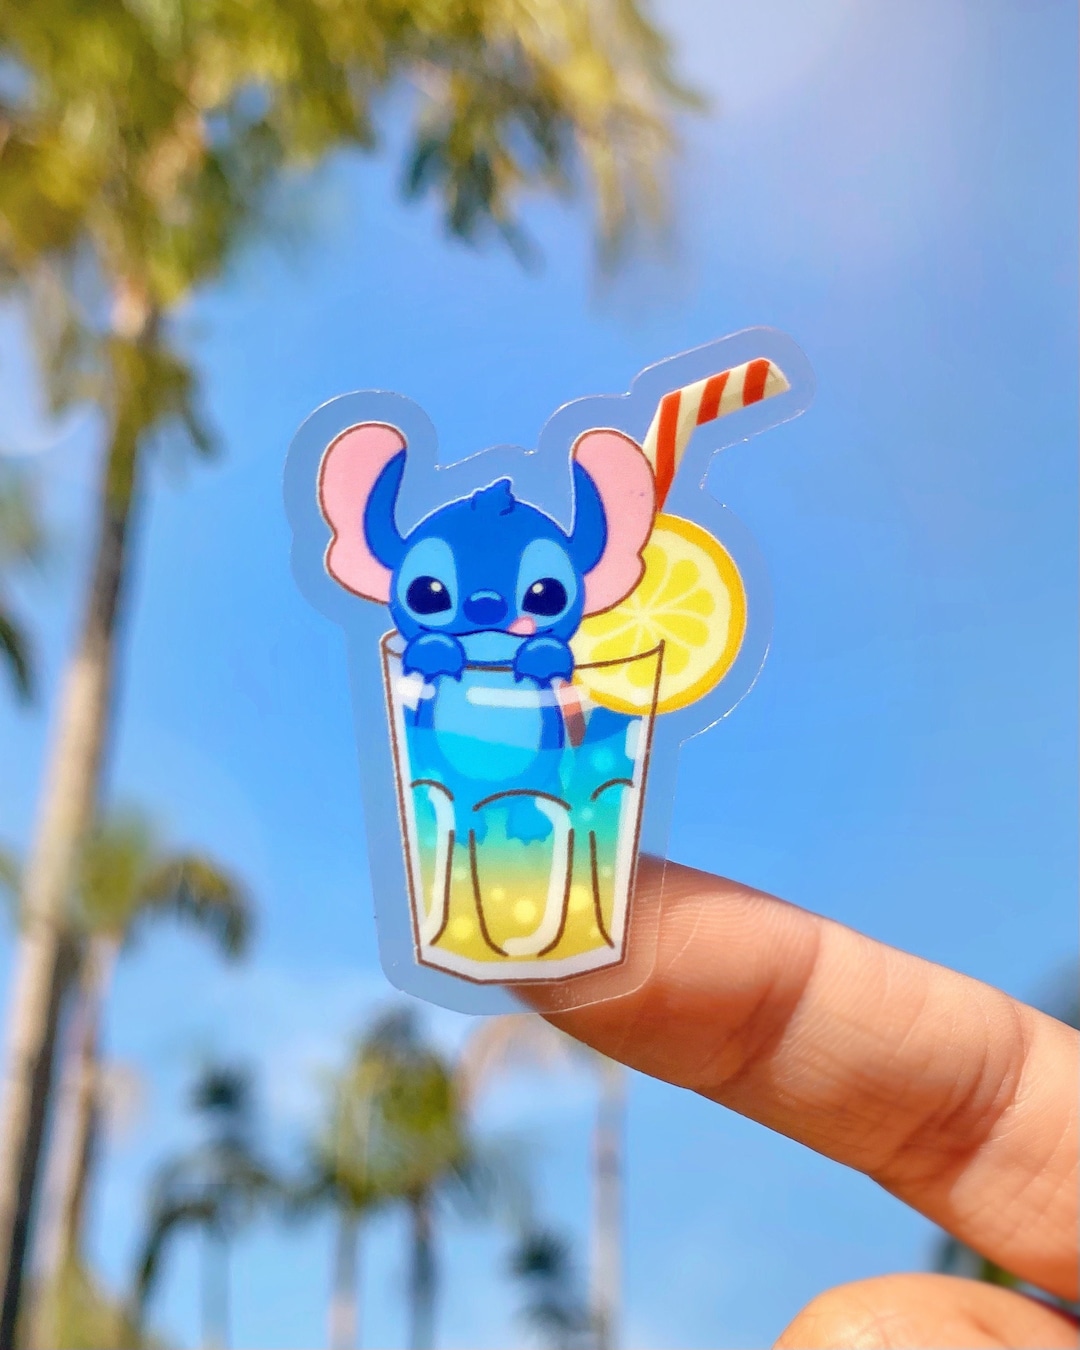 100 PCS Stitch Stickers,Stickers for Water Bottles,Gifts Cartoon  Stickers,Vinyl Waterproof Stickers for Laptop,Bumper,Water